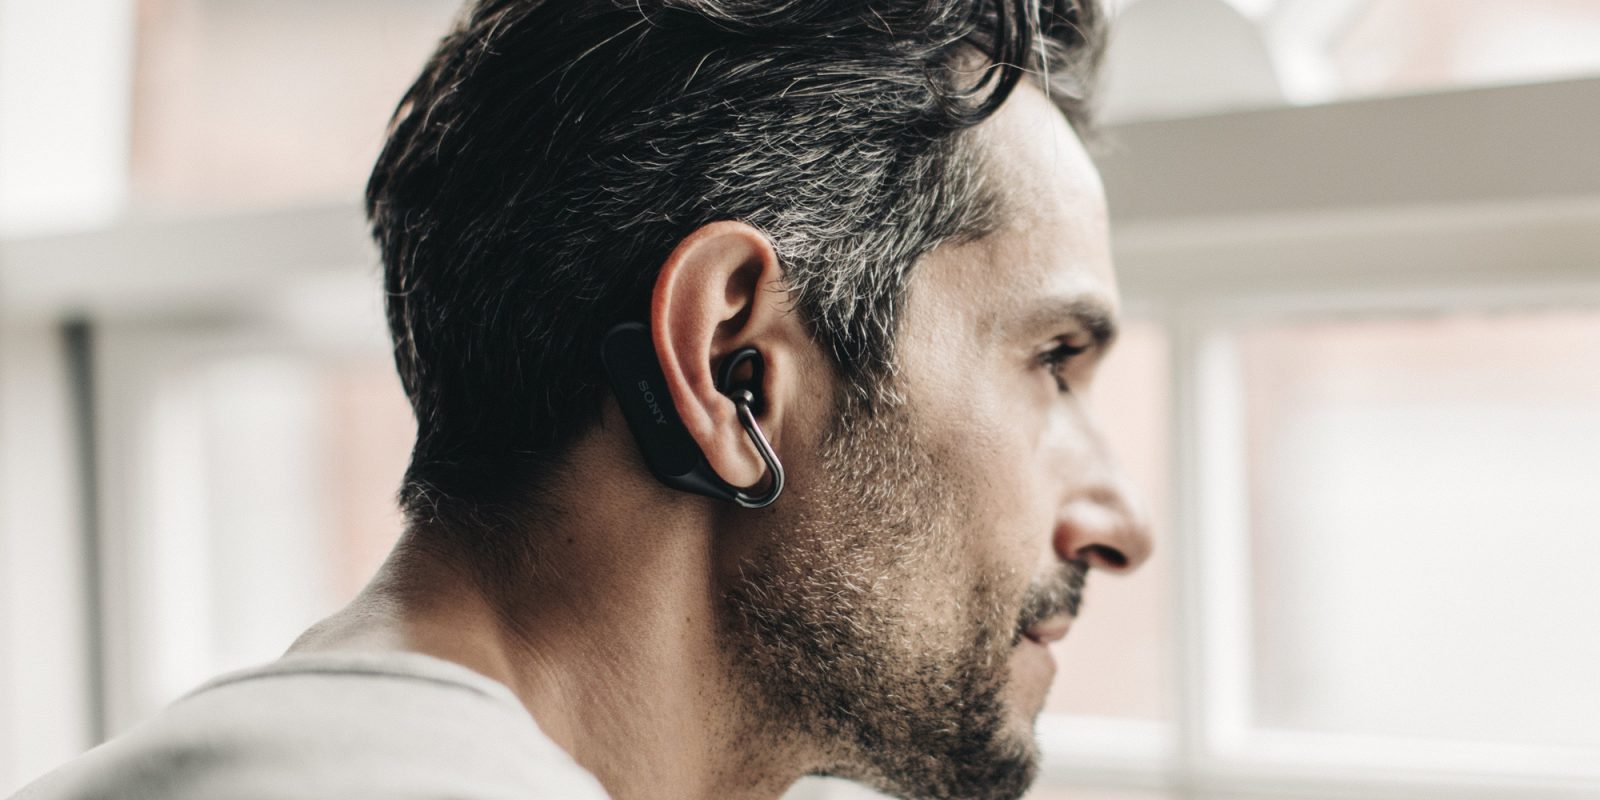 Sony's Xperia Ear Duo wireless earbuds ship this month for $280